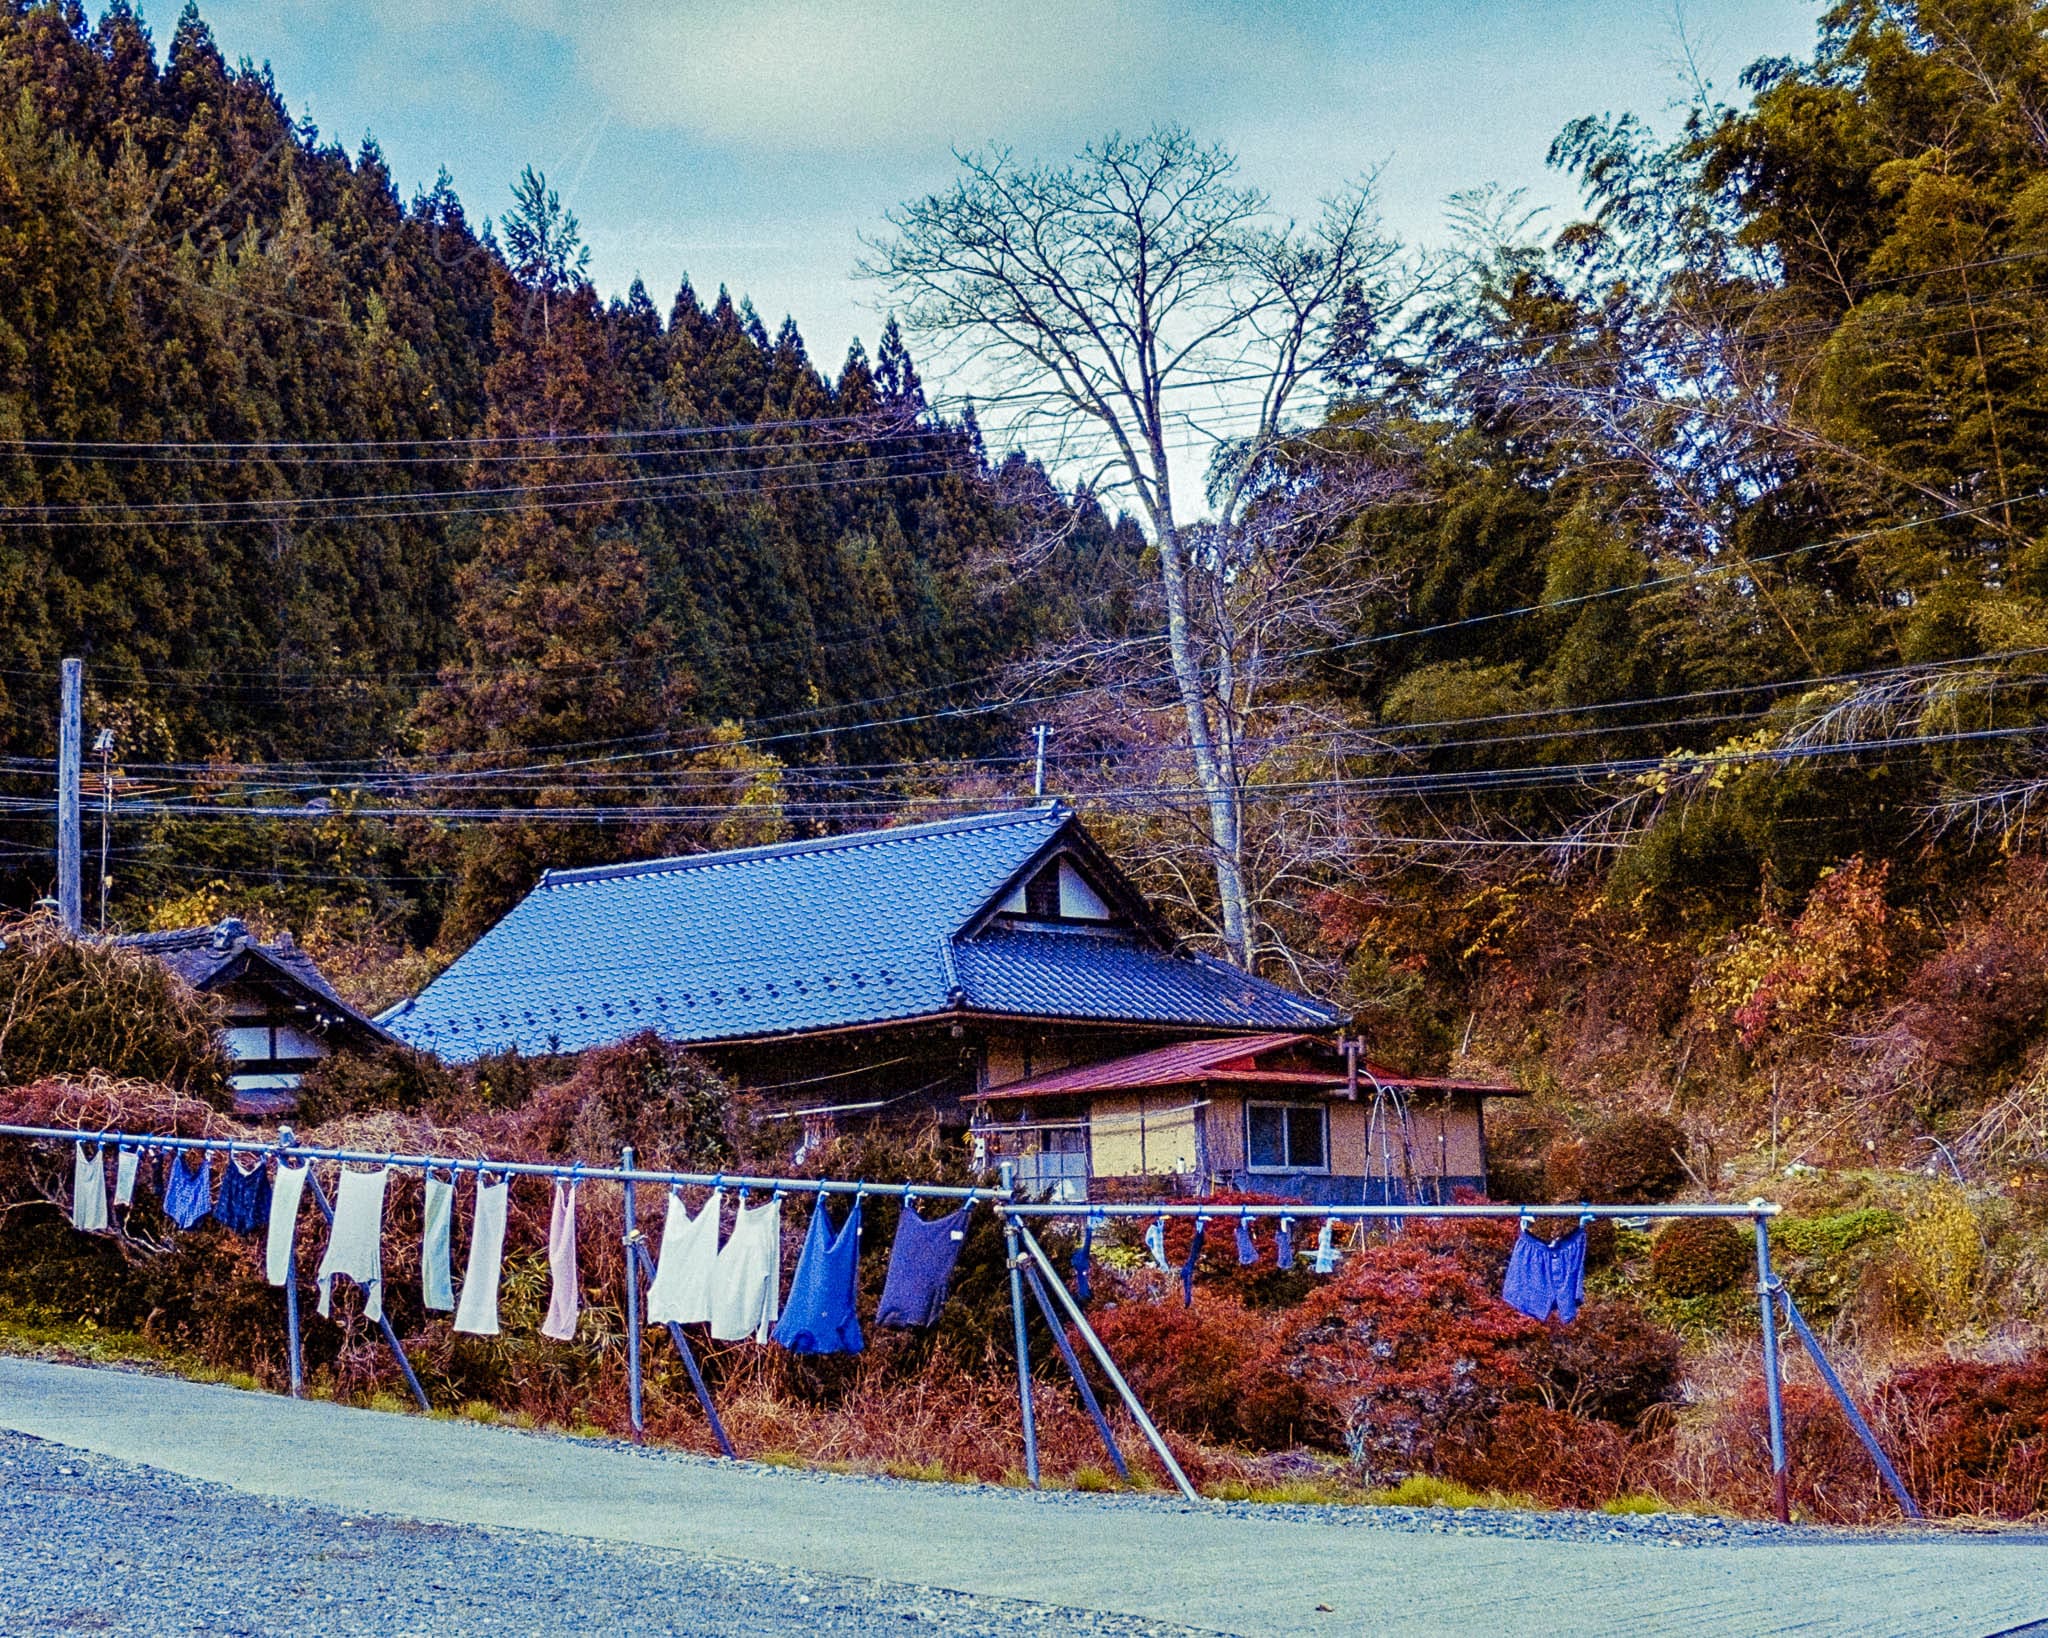 Traditional Japanese house with clothesline in serene rural setting during autumn